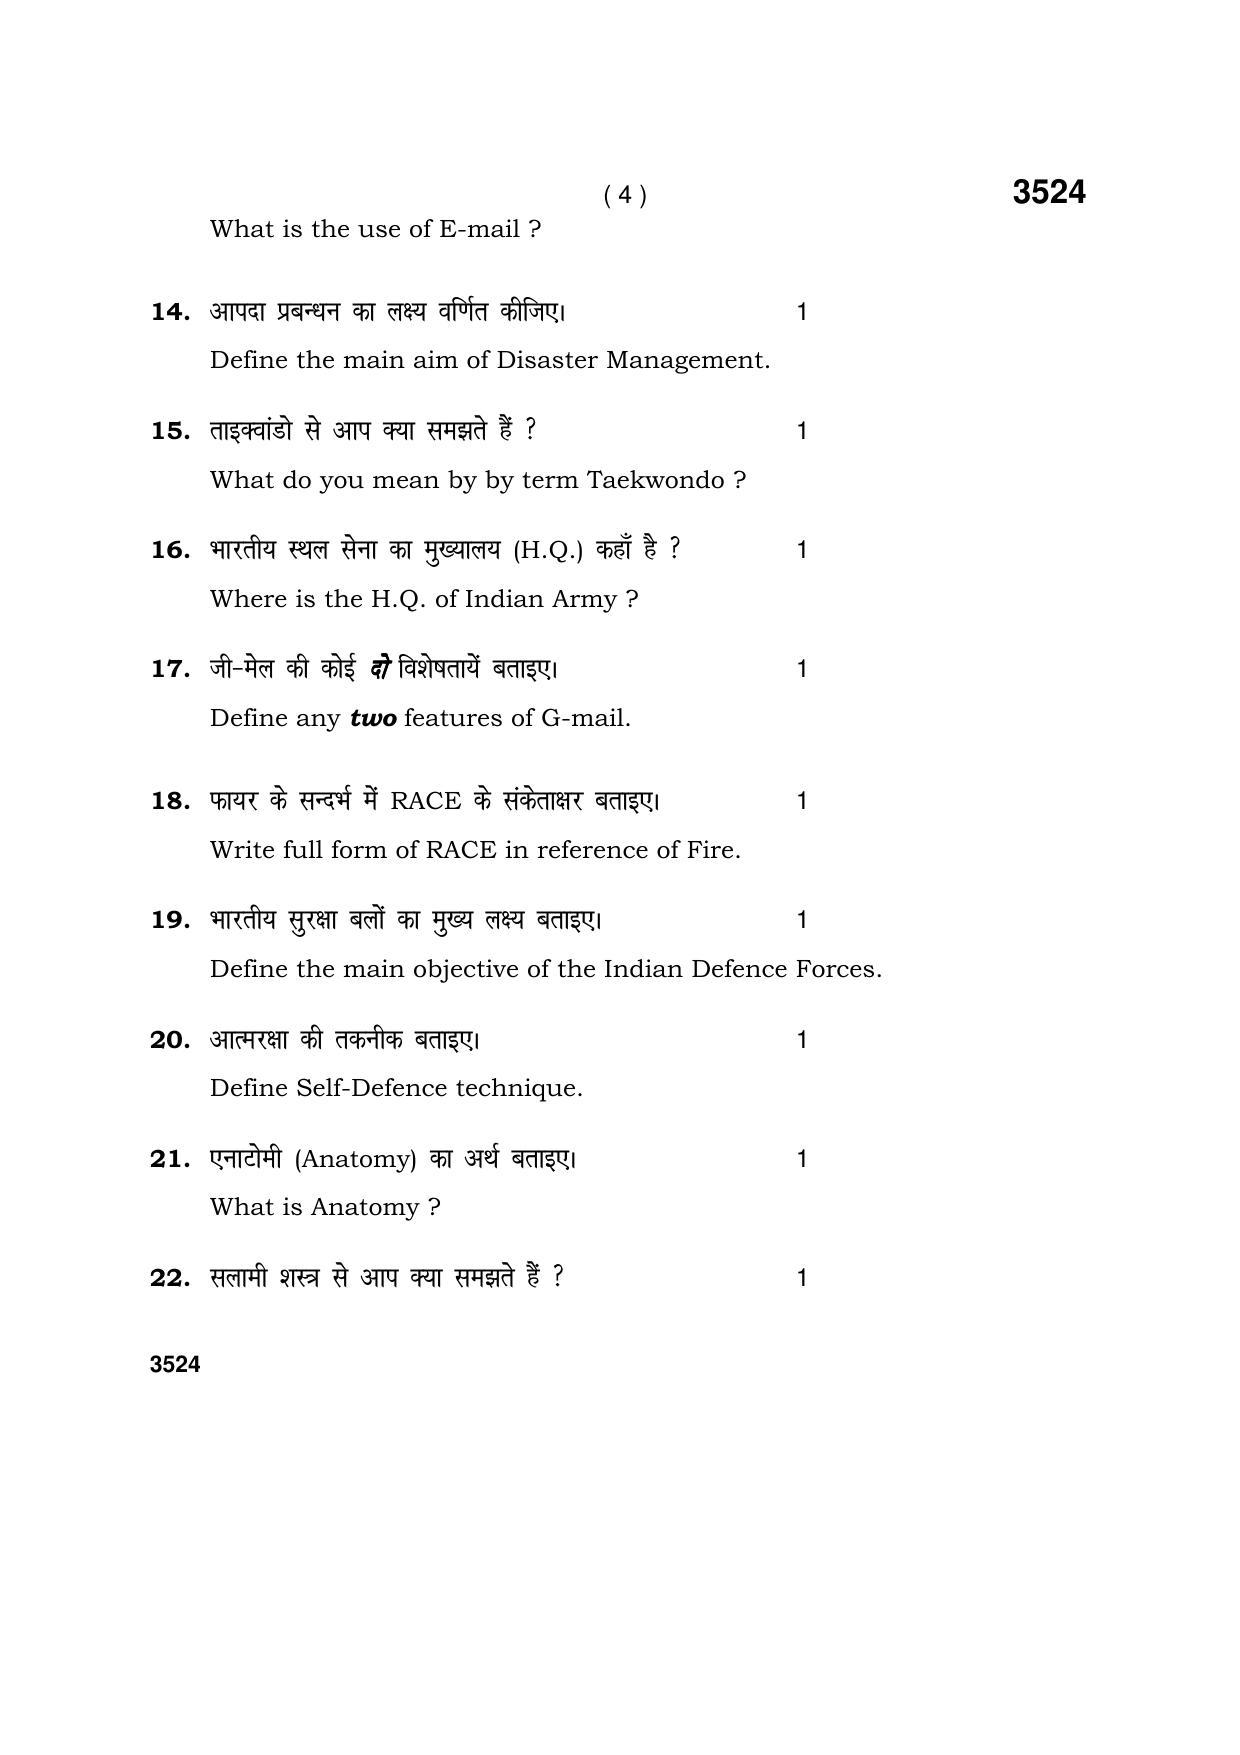 Haryana Board HBSE Class 10 Security 2018 Question Paper - Page 4